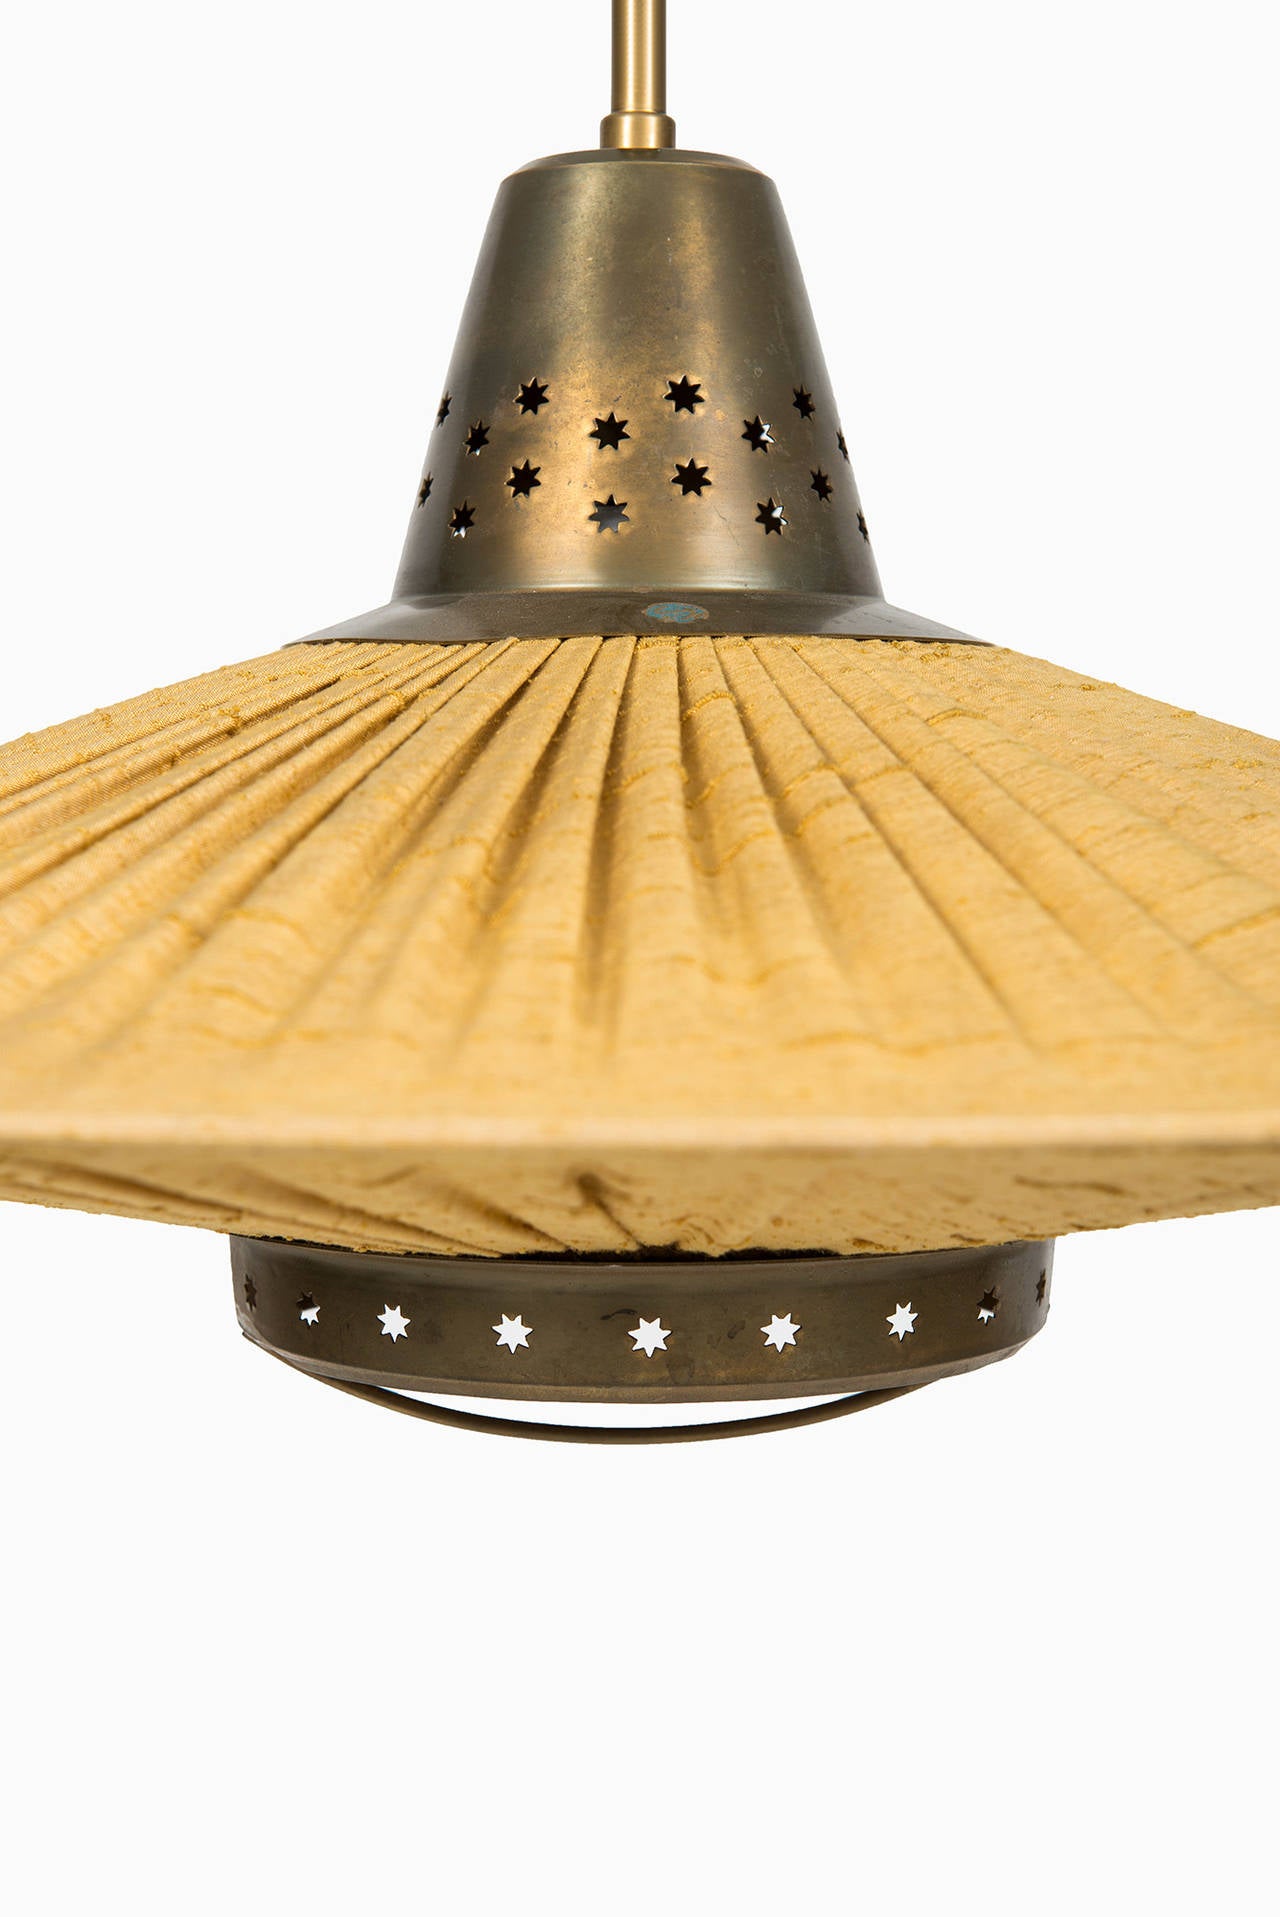 Swedish Ceiling Lamp Attributed to Hans Bergström, Produced by Bergbom, Sweden